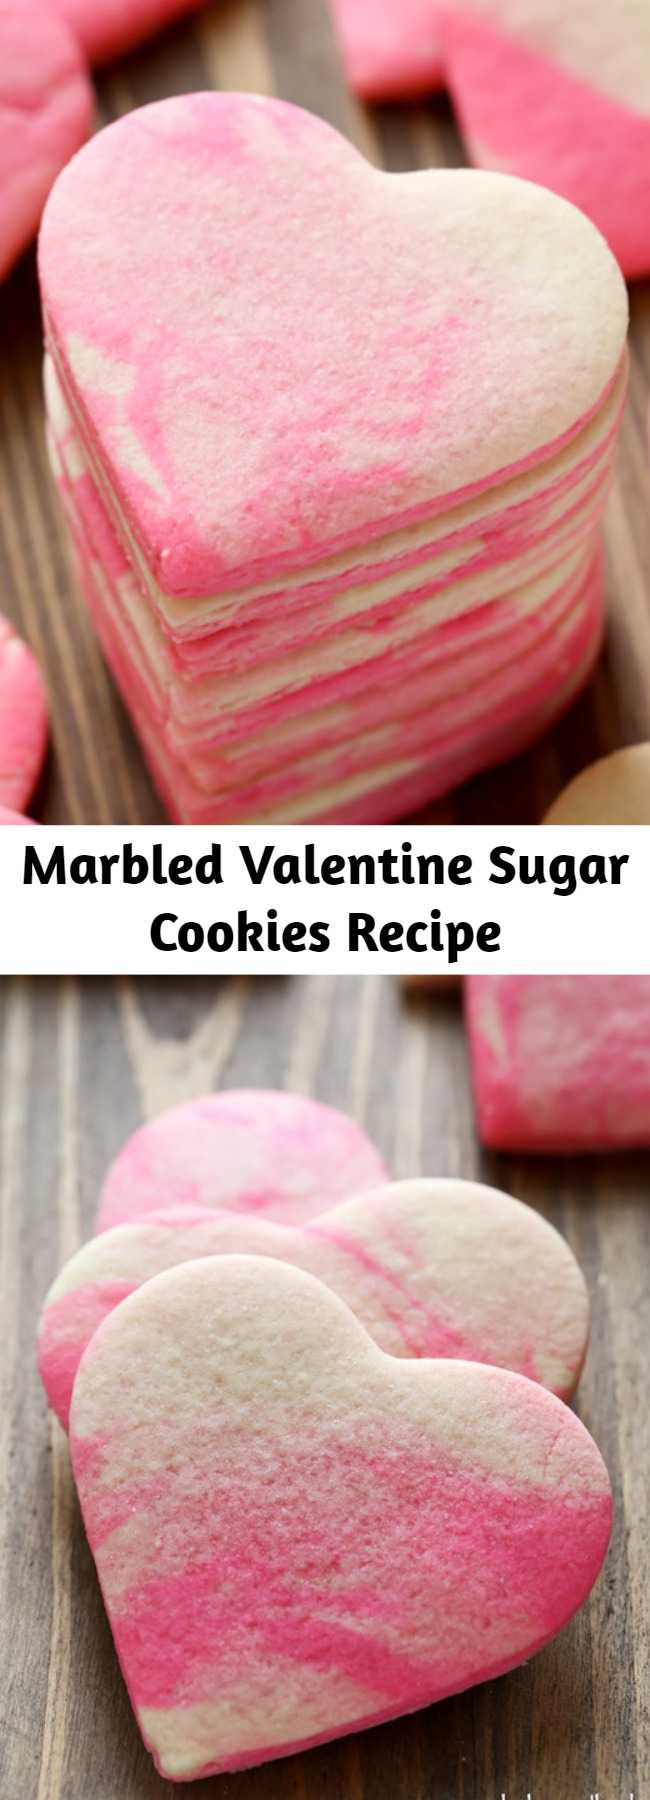 Marbled Valentine Sugar Cookies Recipe - Classic homemade sugar cookies with a fun marbled twist for Valentine's Day. A festive treat for the entire family!